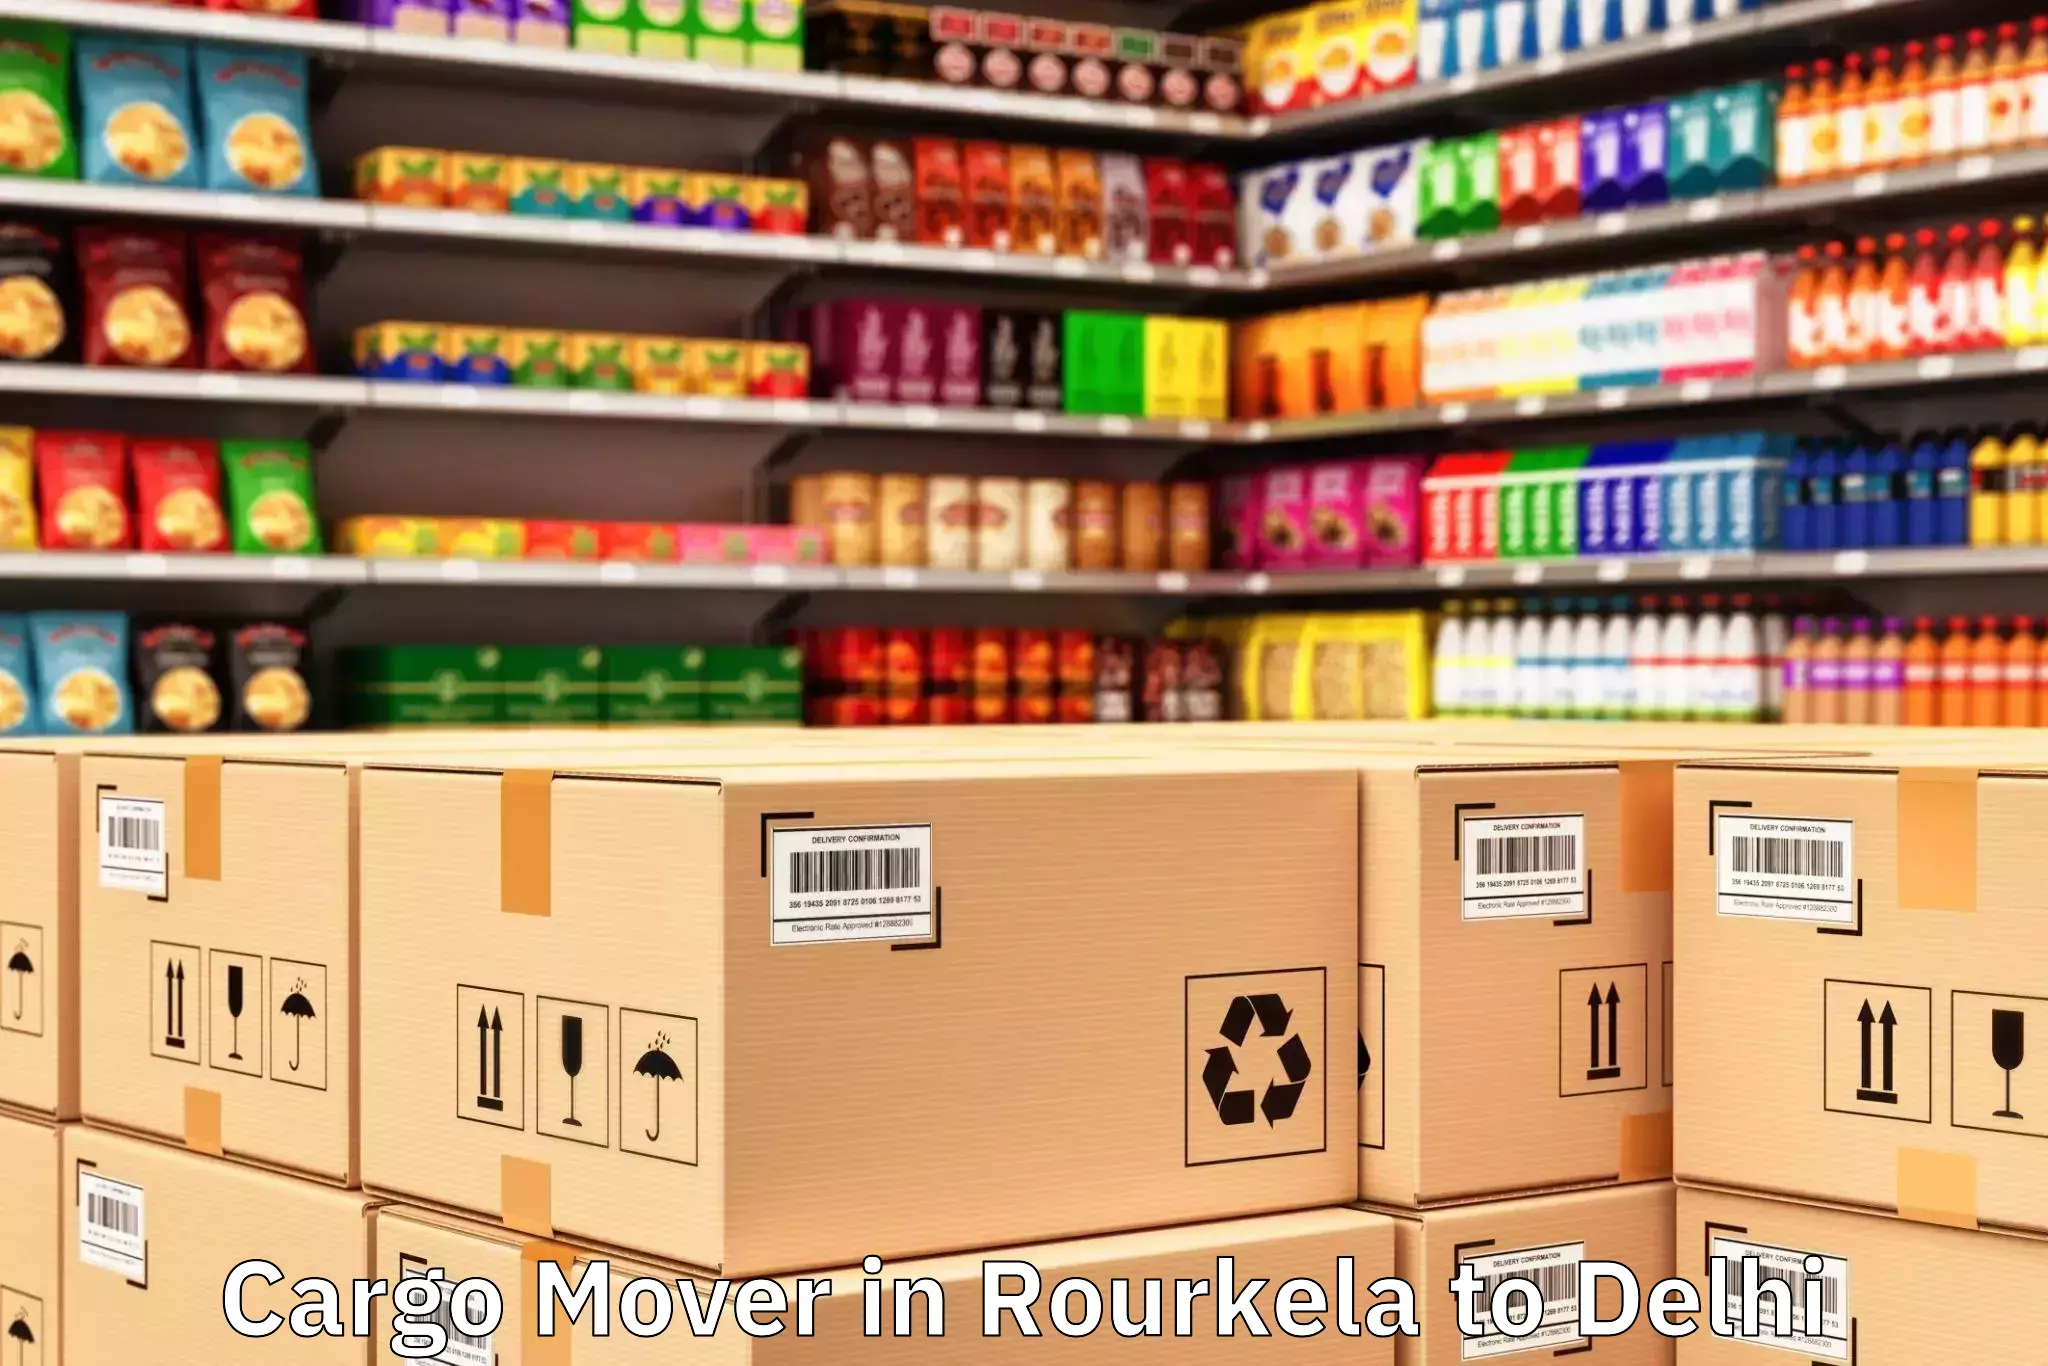 Reliable Rourkela to Select Citywalk Mall Cargo Mover